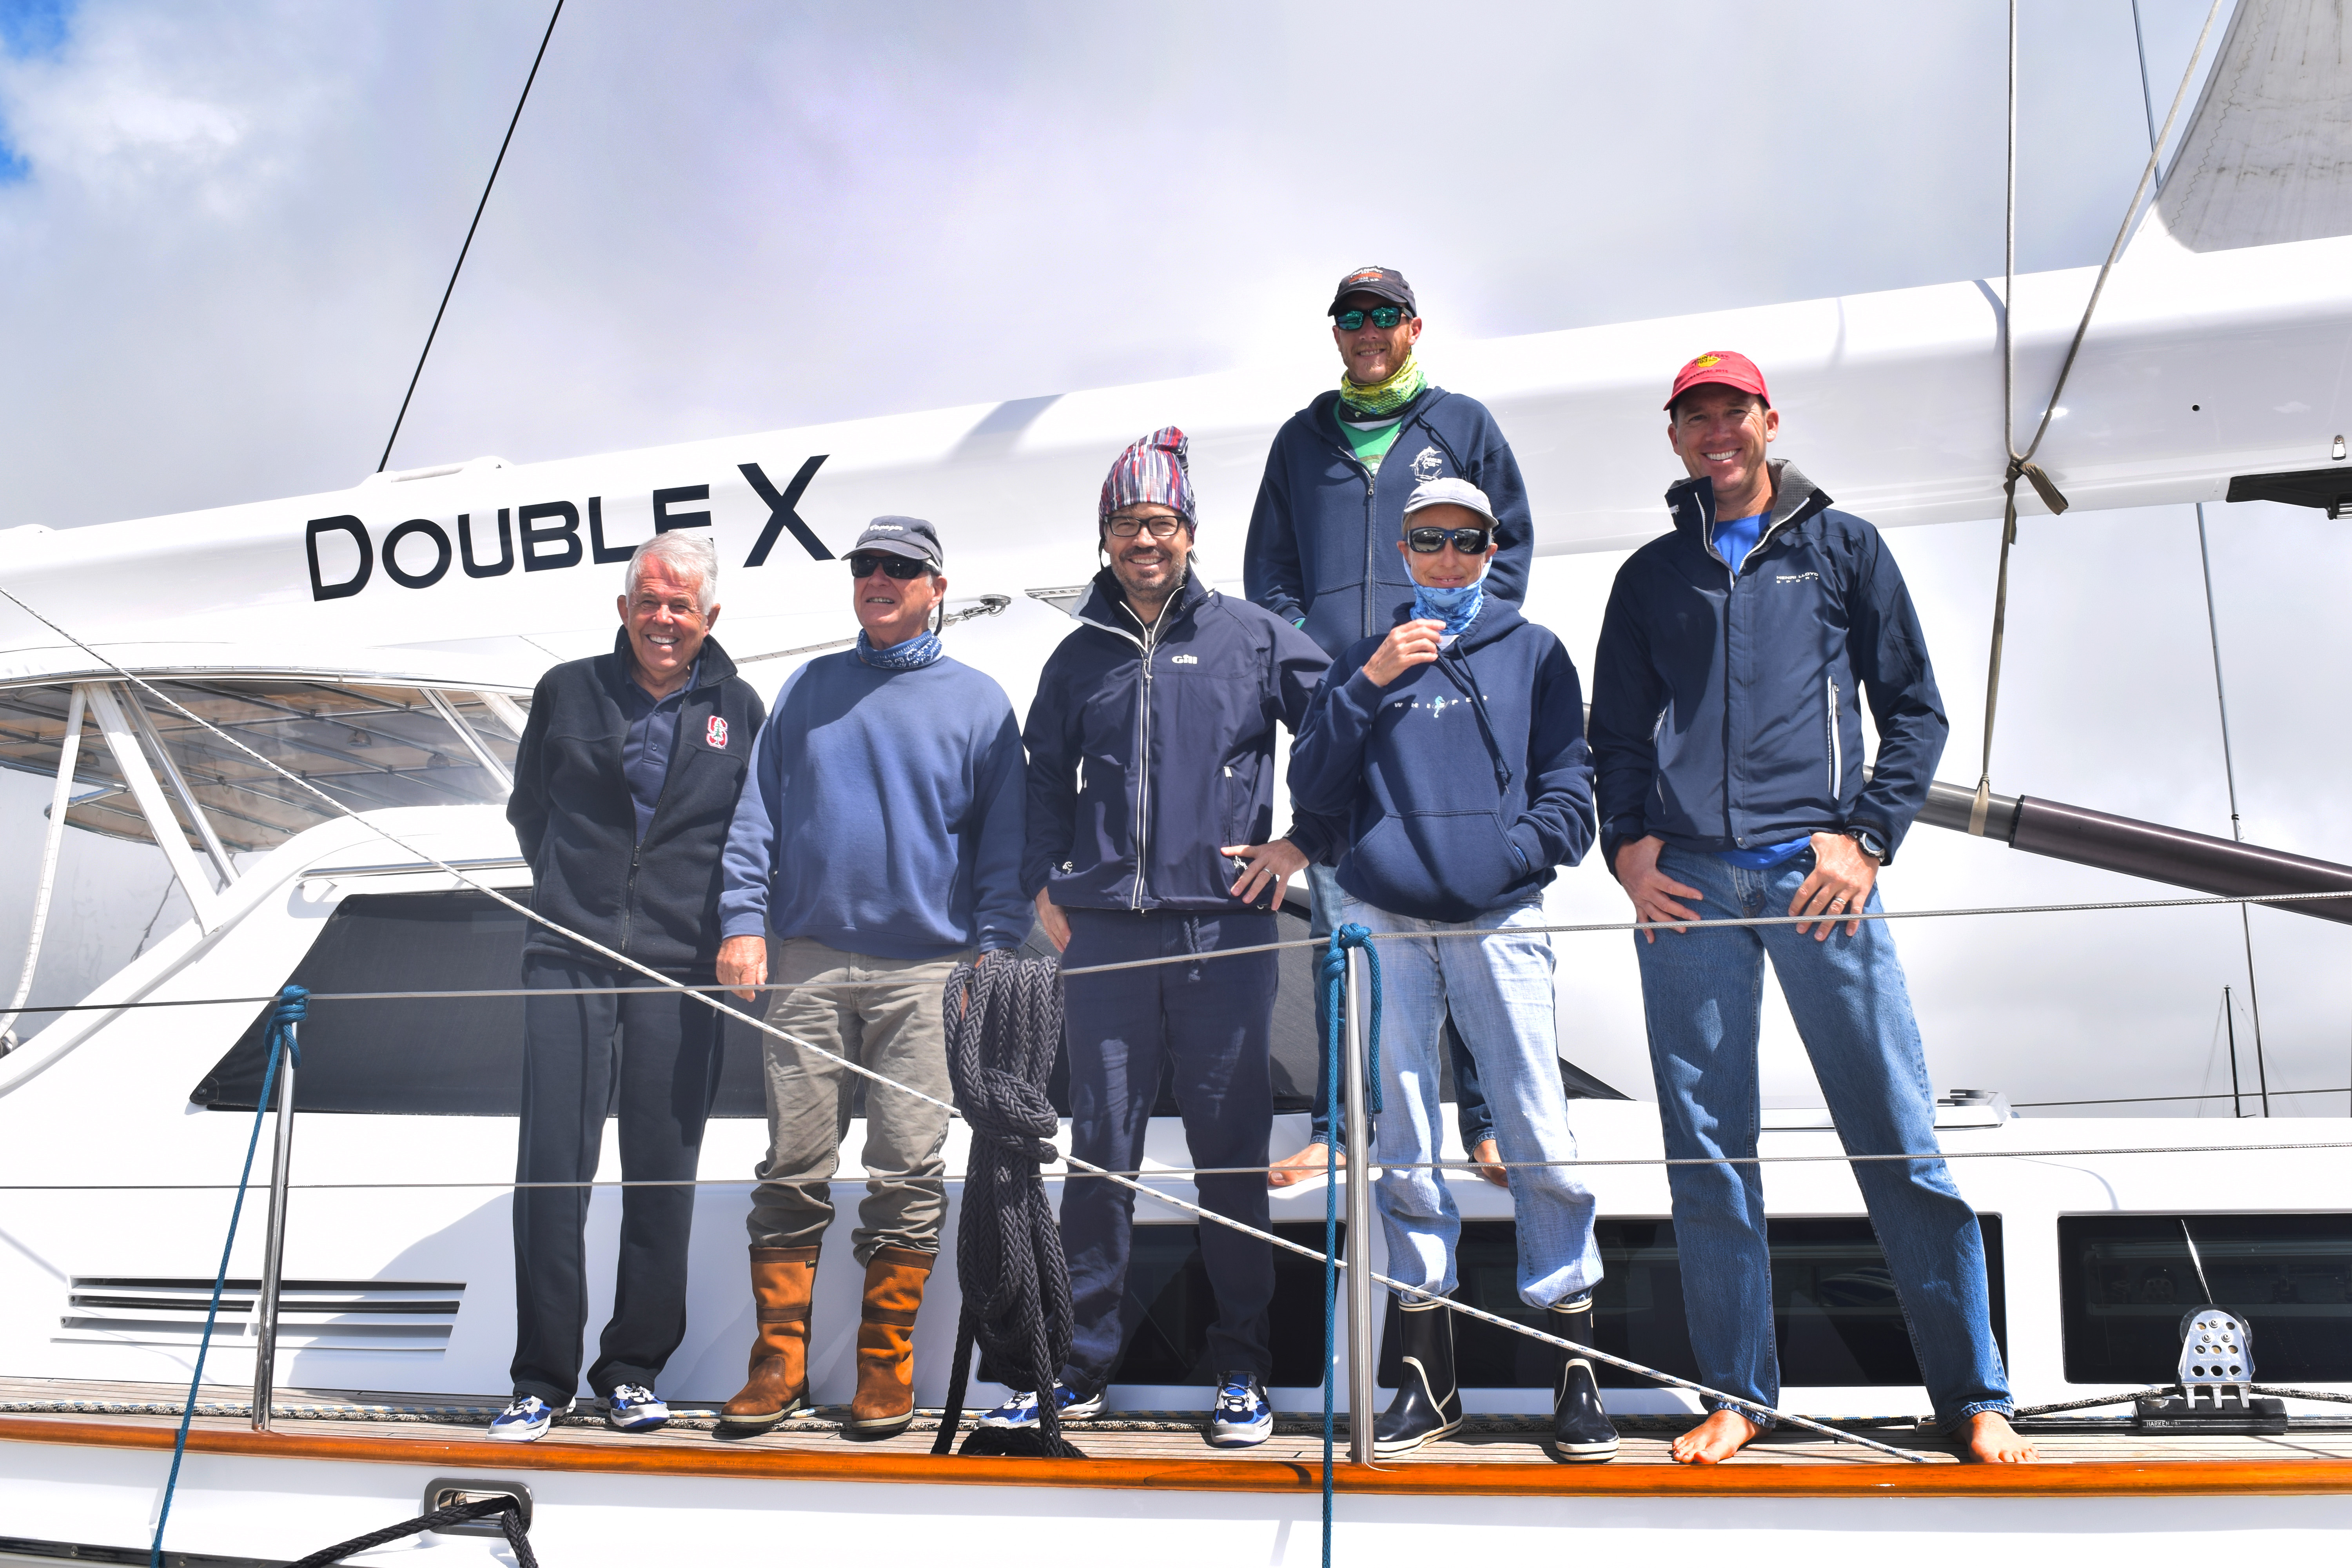 The Double X crew poses for one last photo before departing for the South Seas (from left to right): Dr. Sam, Captain Bob, Rod, Paul, Els and Zach. Sausalito, California. July 16, 2016. Photo: L. Williams